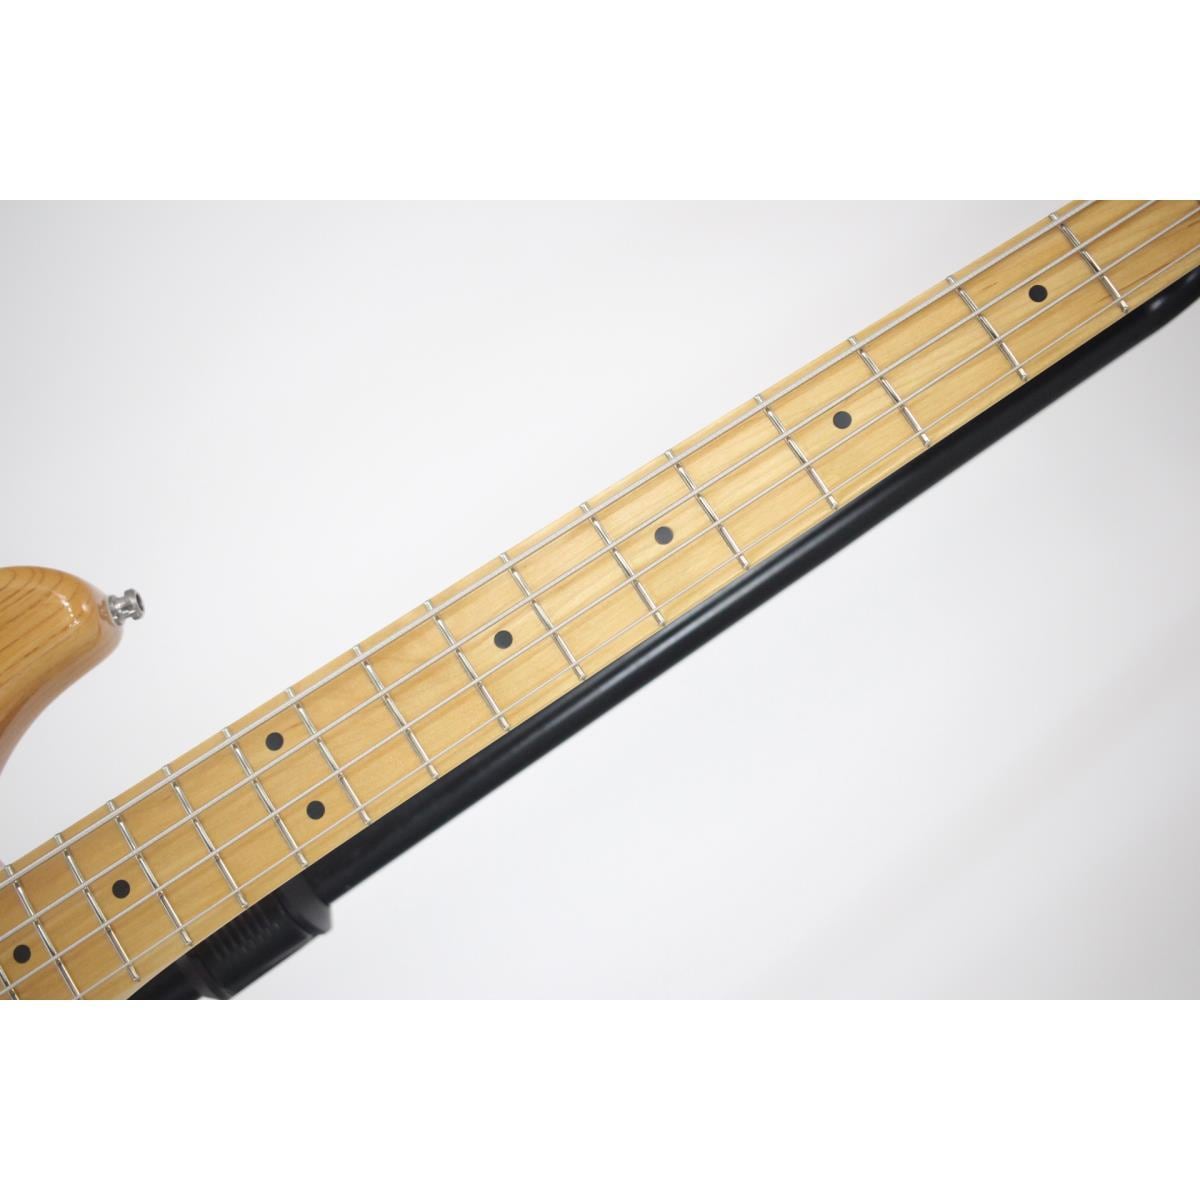 FENDER AMERICAN DELUXE DIMENSION BASS IV